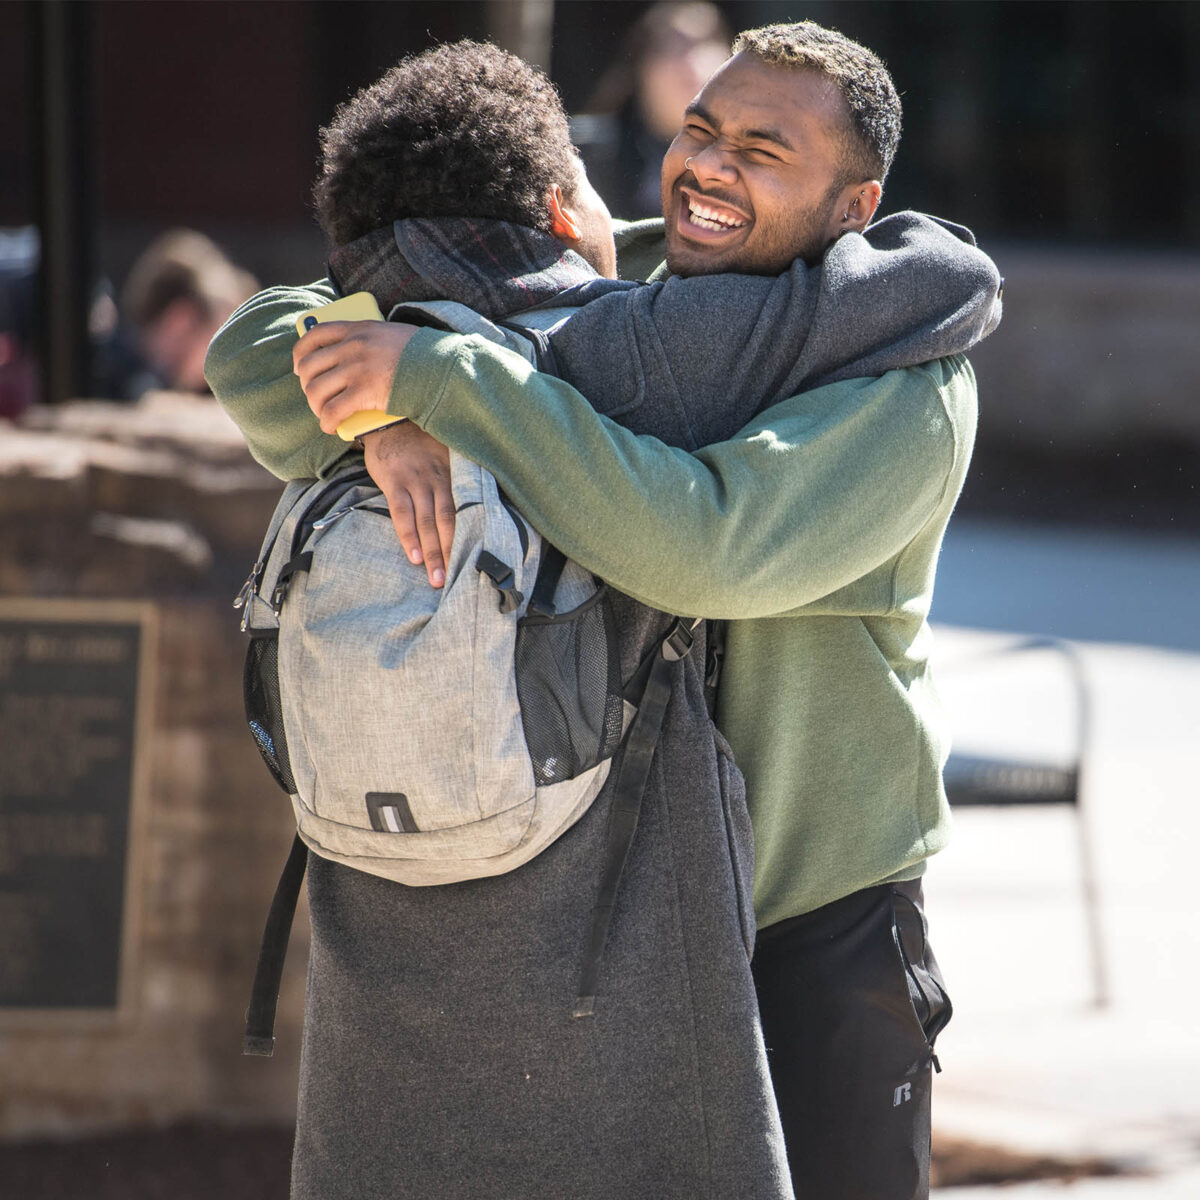 two students hug as a greeting, smiling